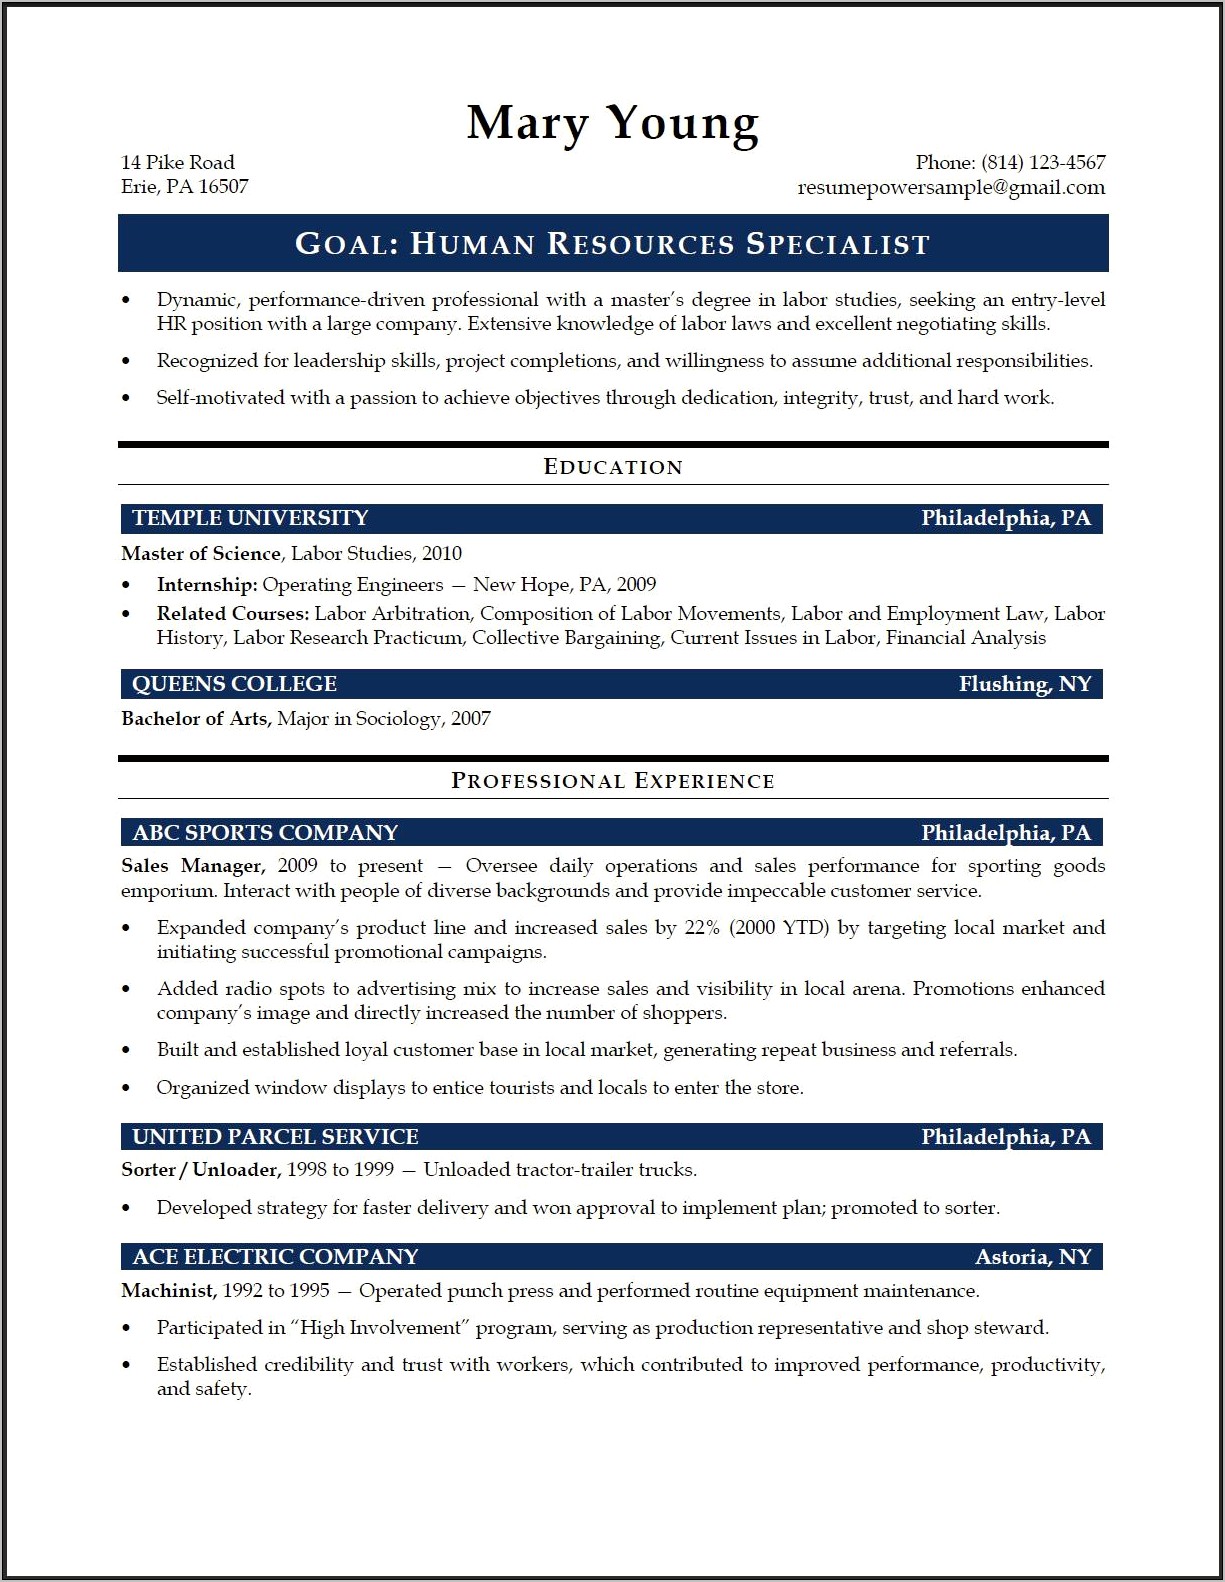 Human Resource Specialist Objective Resume